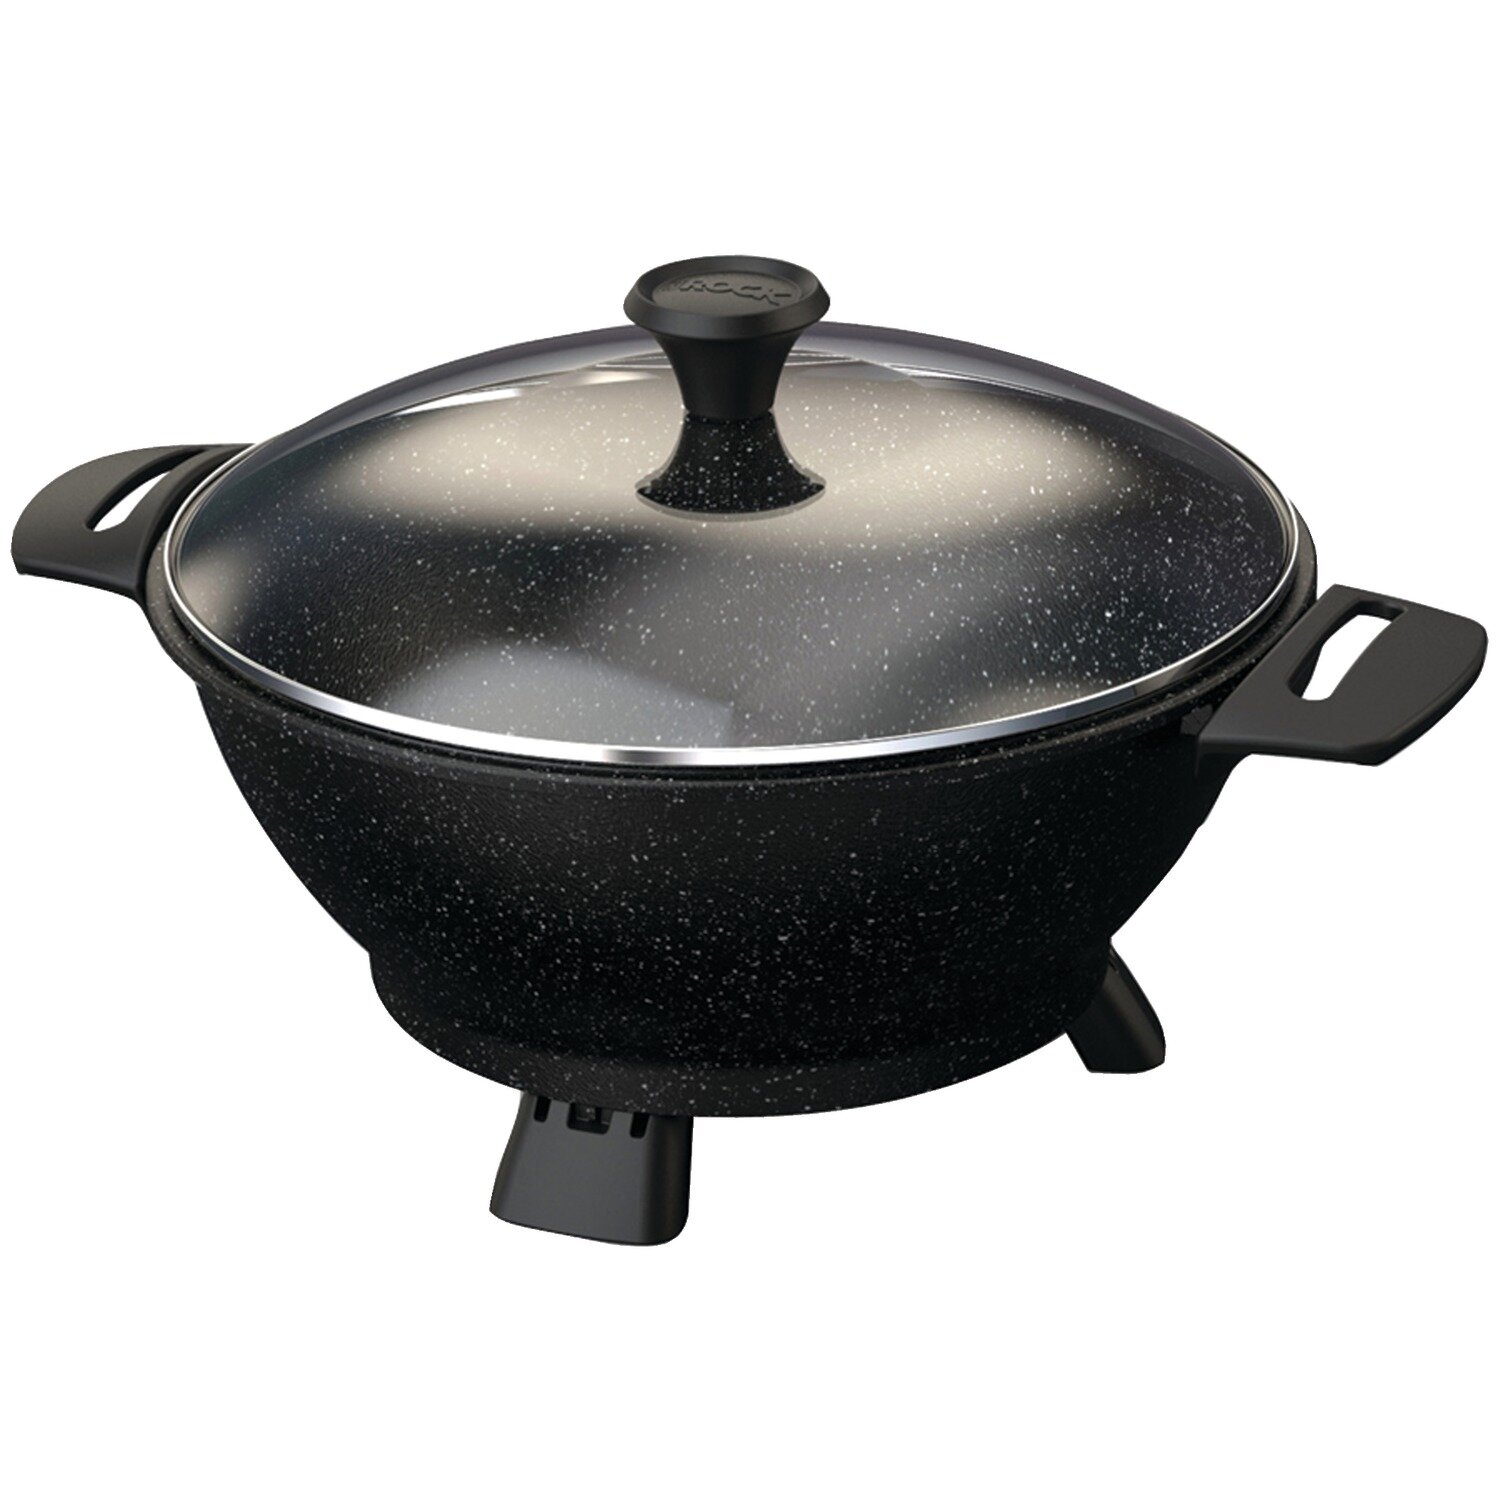 Starfrit The Rock 14.4'' Non Stick Electric Skillet with Glass Lid